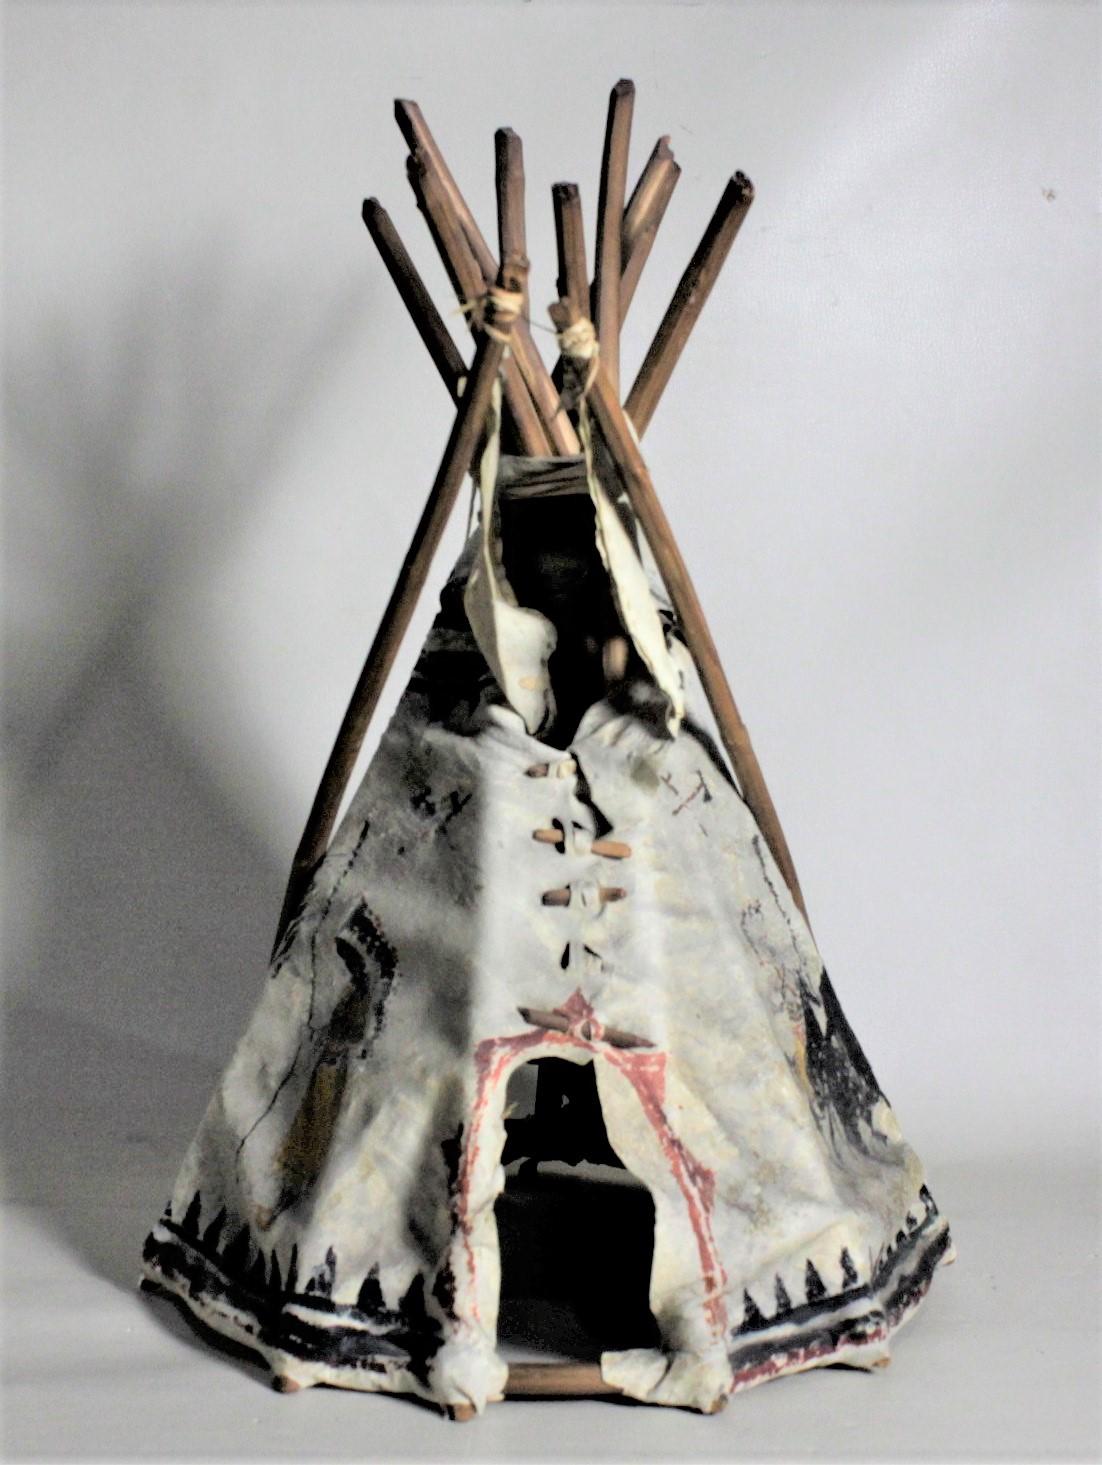 This Mid-Century Modern era Indigenous American miniature teepee is unmarked, but presumed to have been made in Canada in approximately 1945. This teepee was most likely made as a Souvenir or toy for tourists and sold at a 'Trading Post' which were